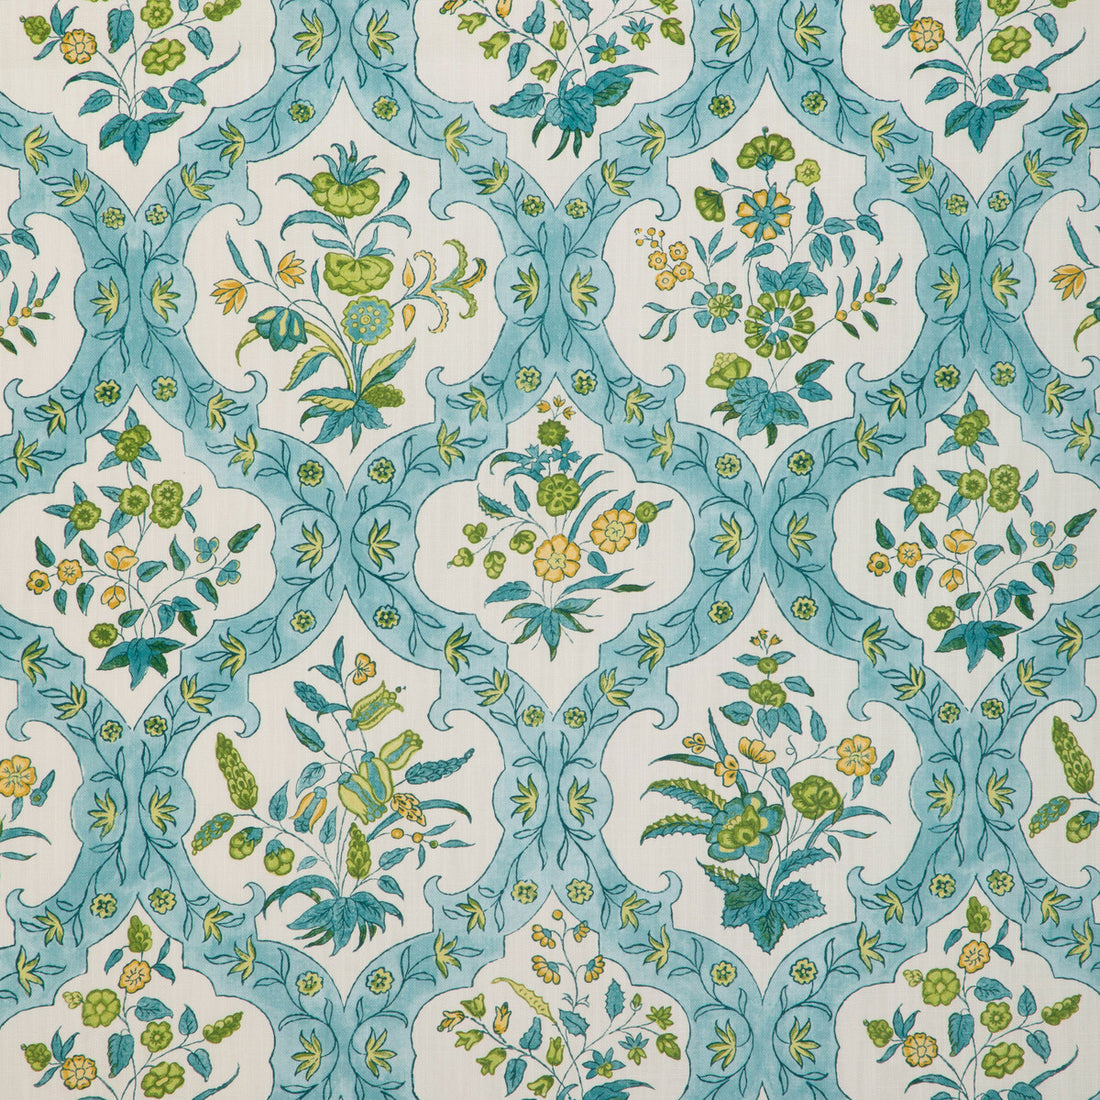 Ventoux Print fabric in aqua color - pattern 8023102.313.0 - by Brunschwig &amp; Fils in the Cadenet collection